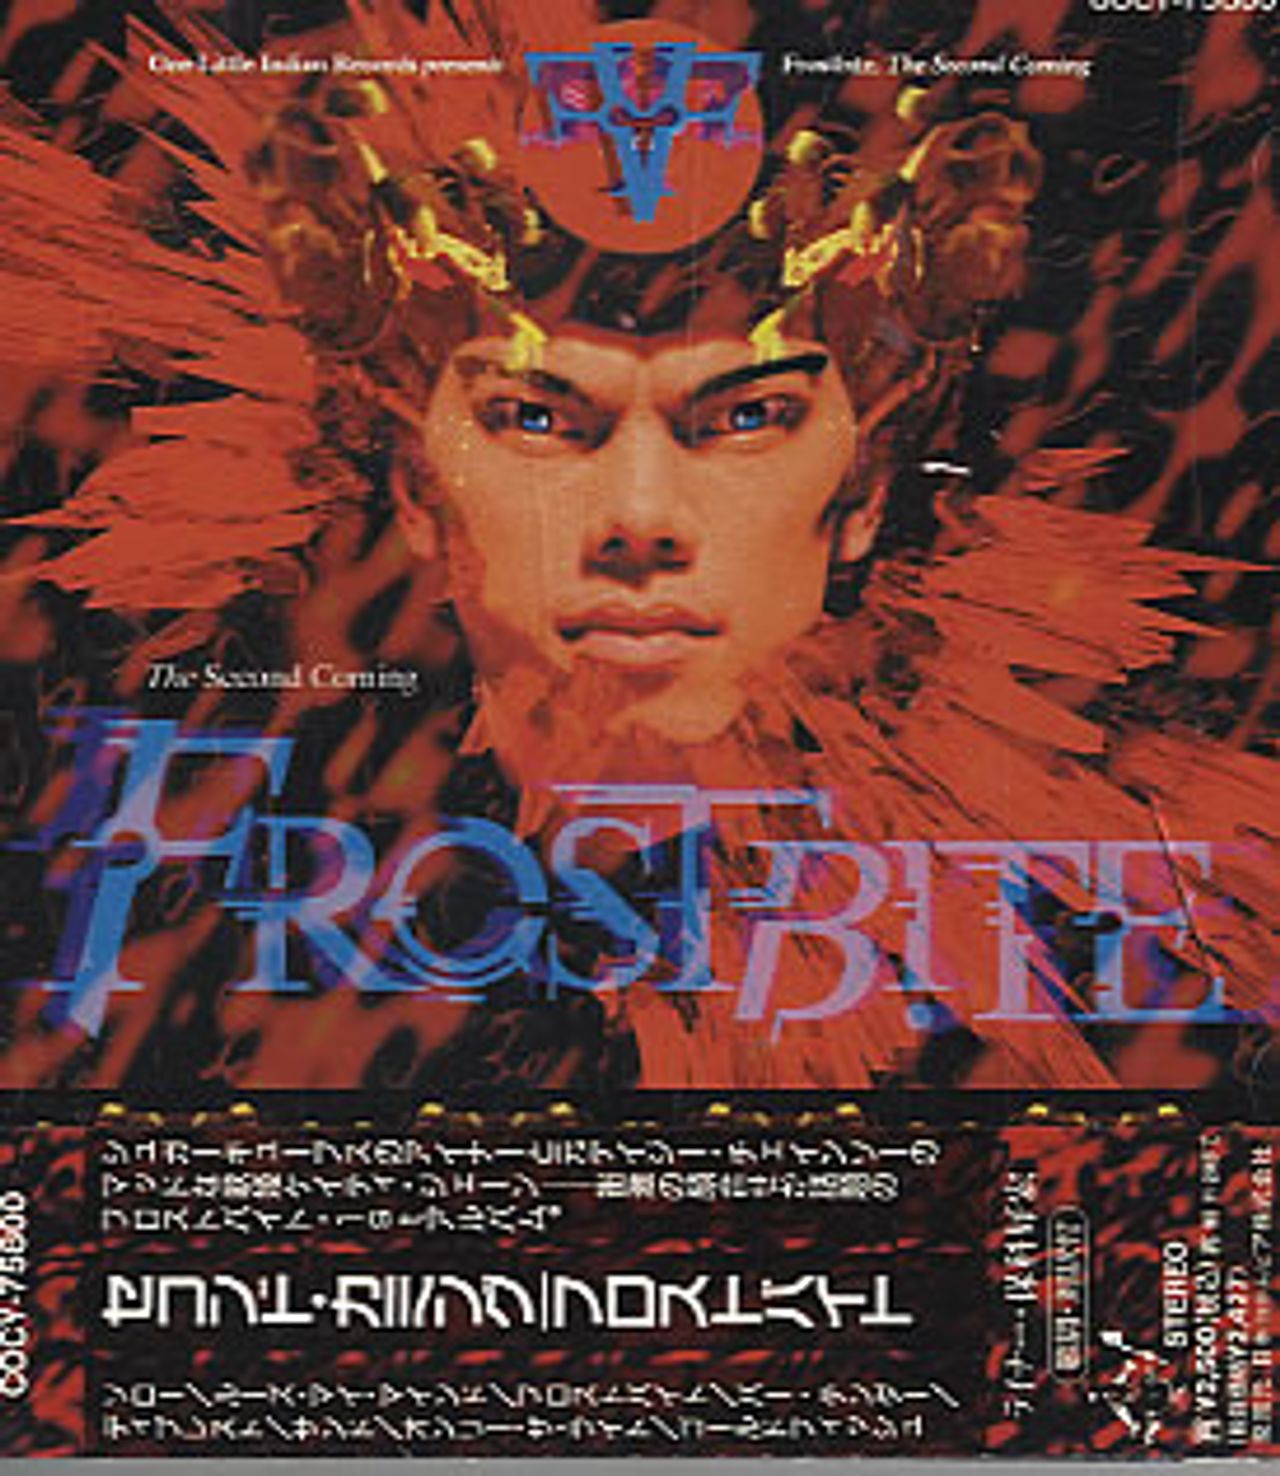 Frostbite The Second Coming Japanese Promo CD album —